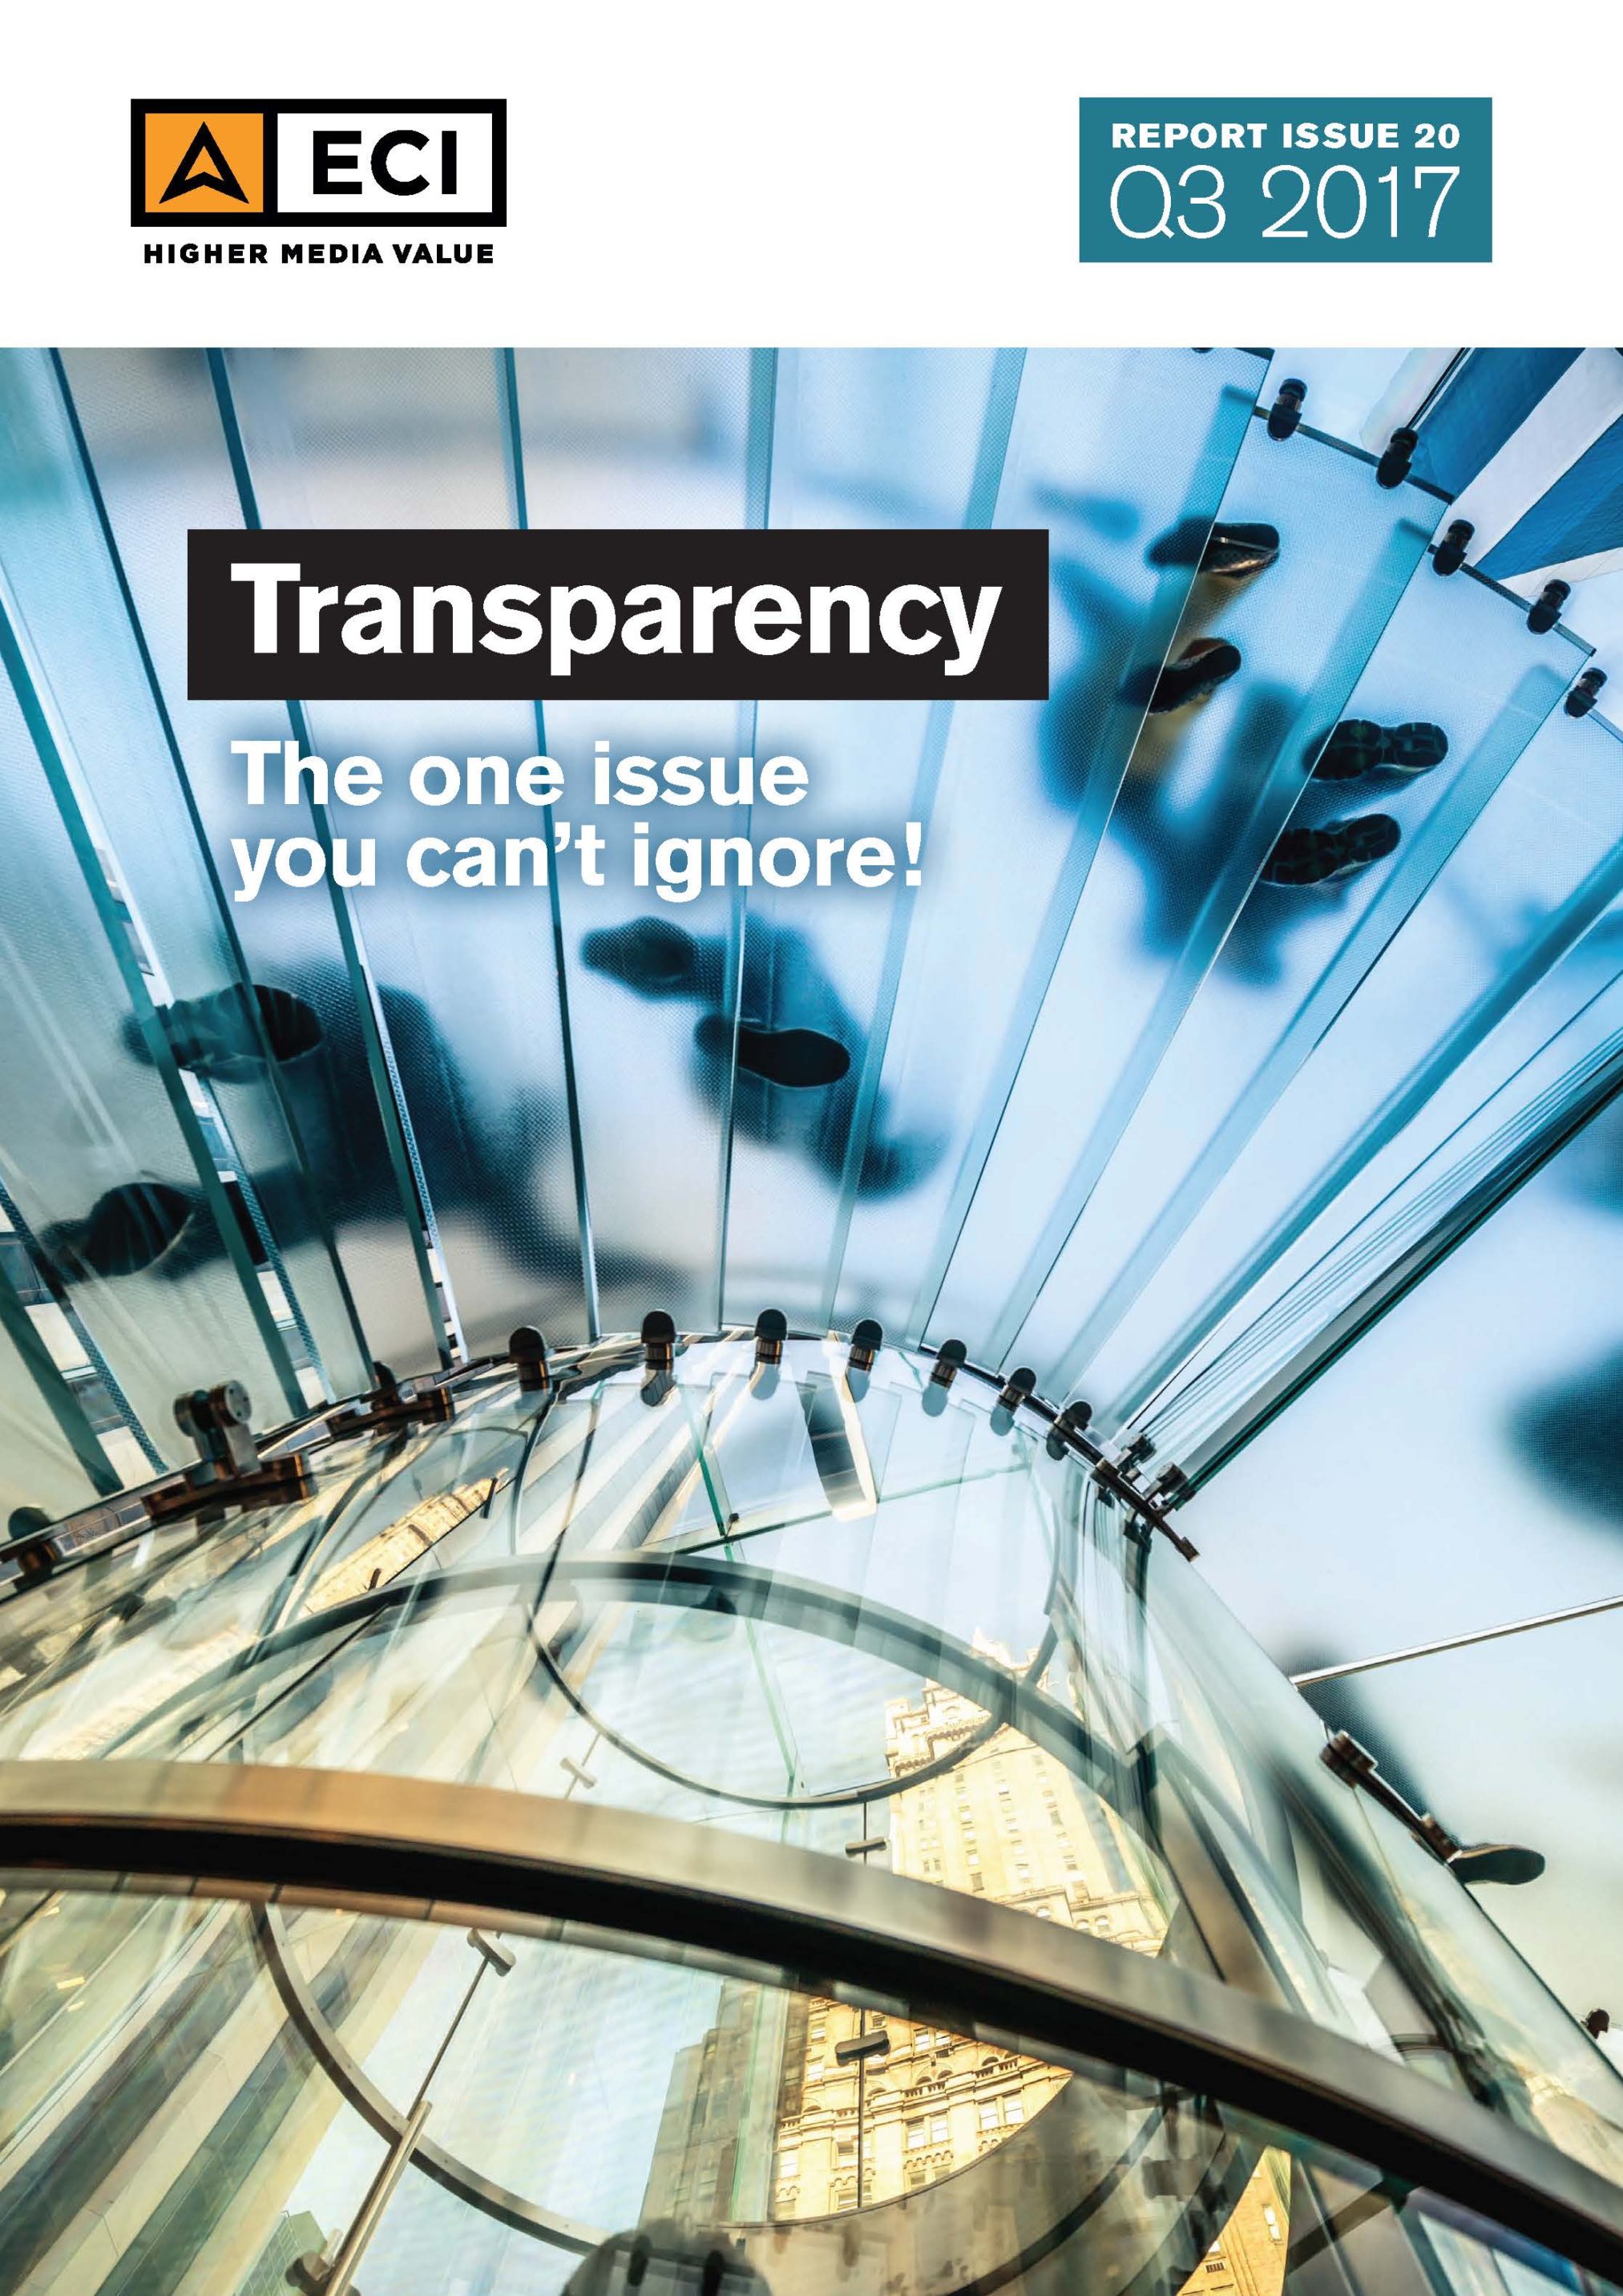 Transparency the one issue you can’t ignore